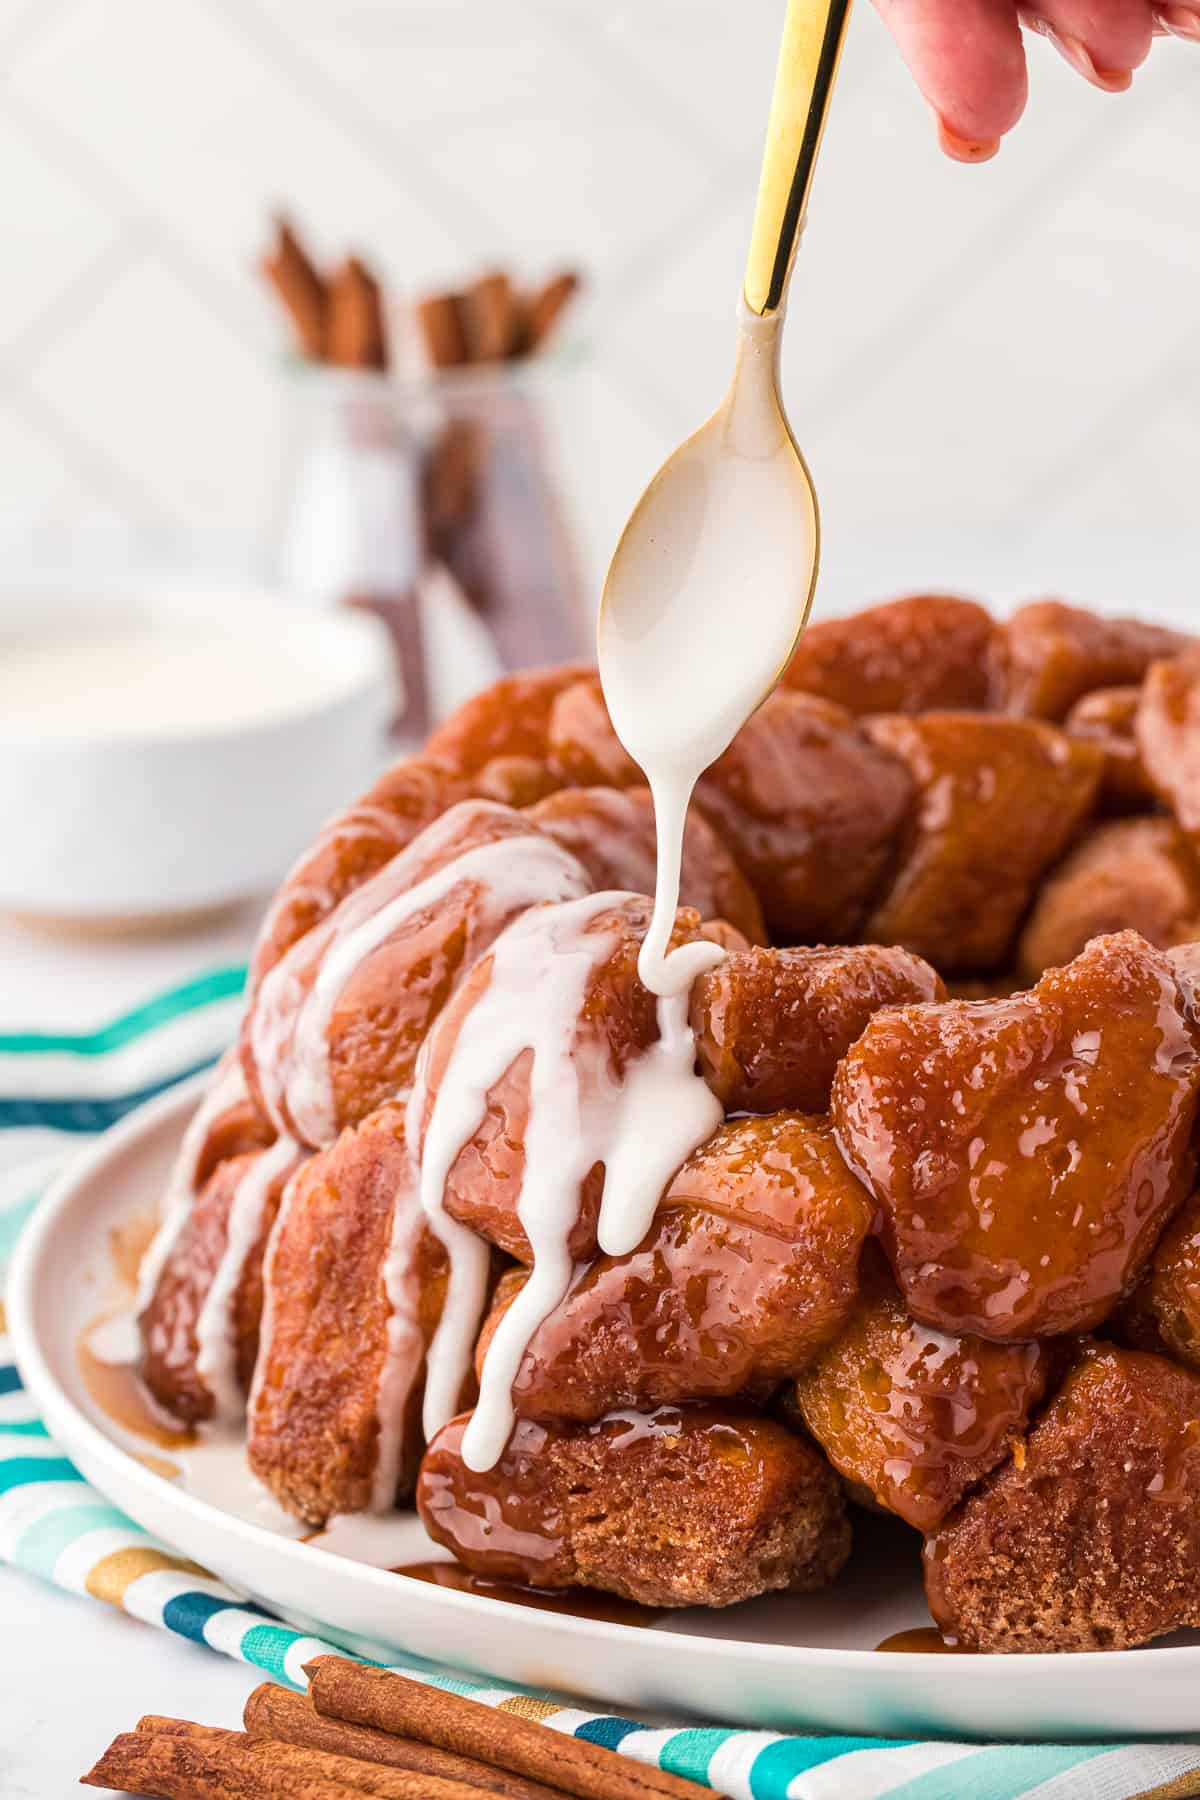 glaze being poured over a plate of monkey bread with a gold spoon, with the plate sitting on a teal, blue and gold striped towel with cinnamon sticks beside it